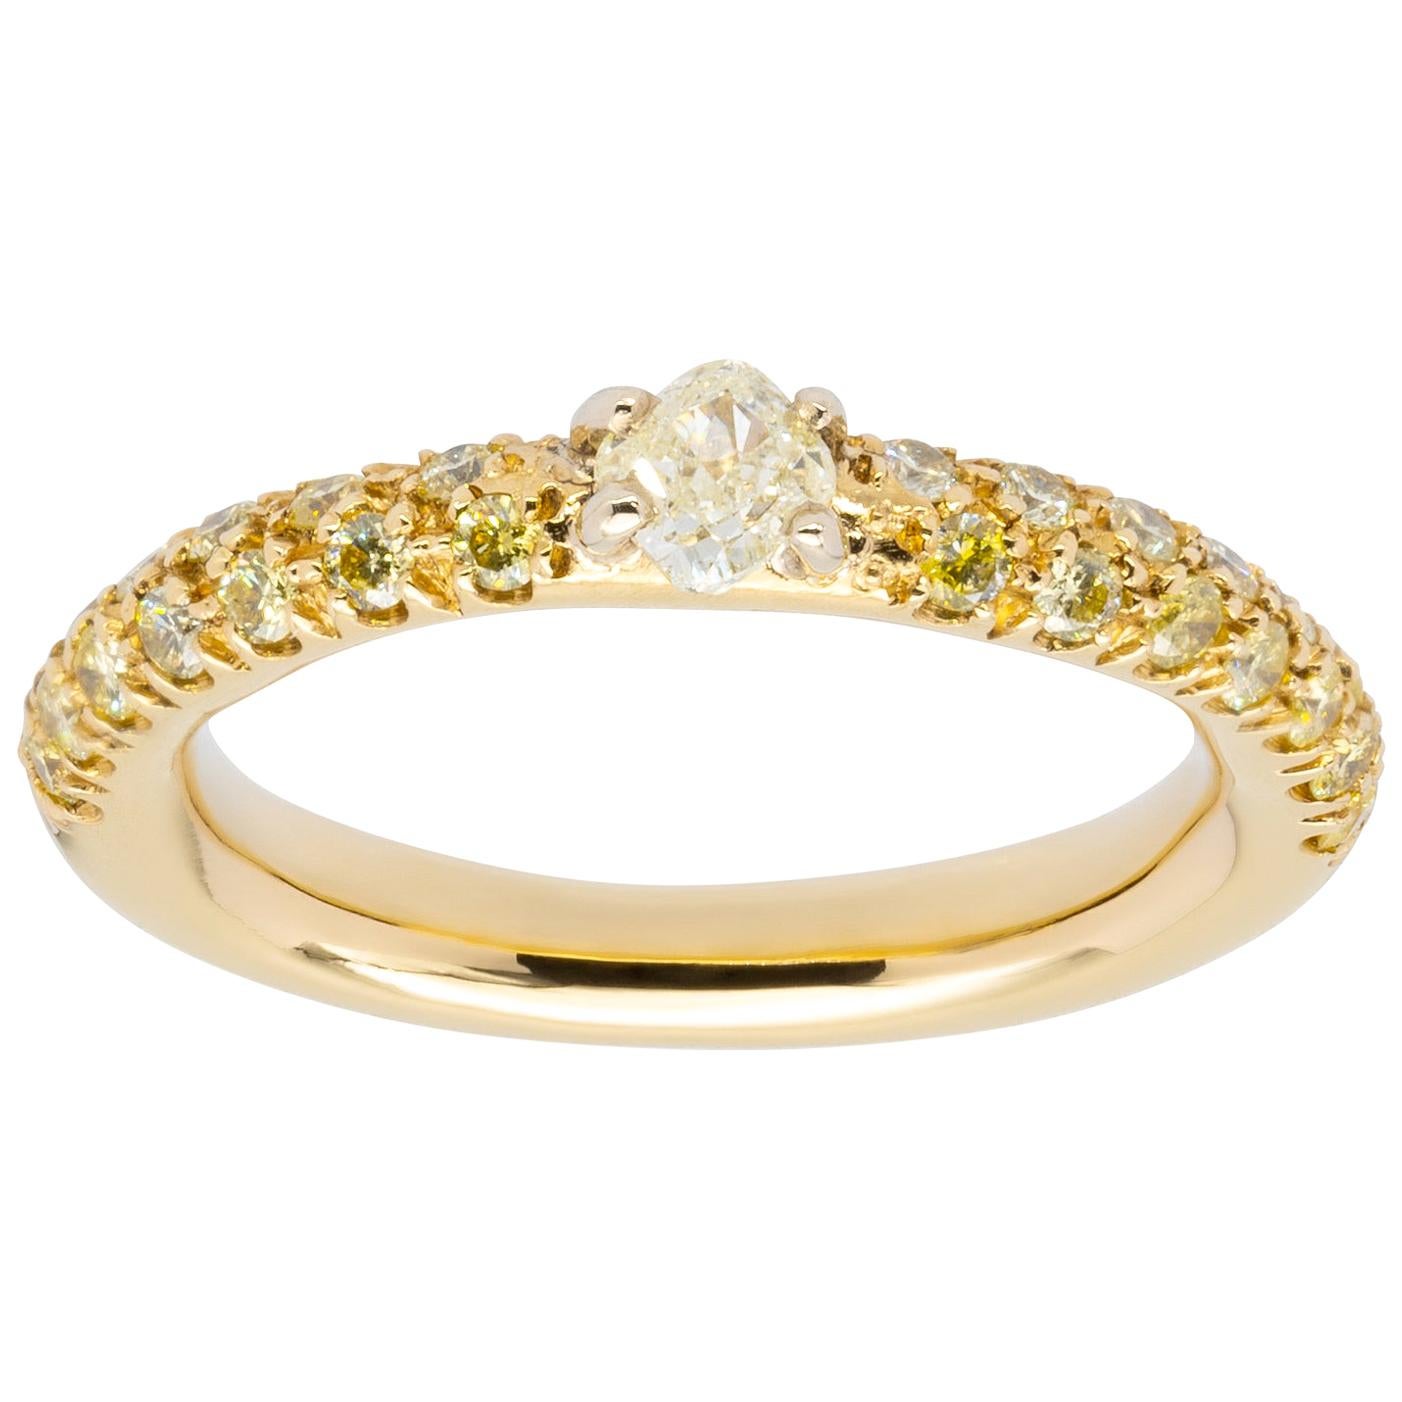 1.03 Carats of Fancy Natural Diamonds d'Avossa Sunshine Collection Ring For Sale